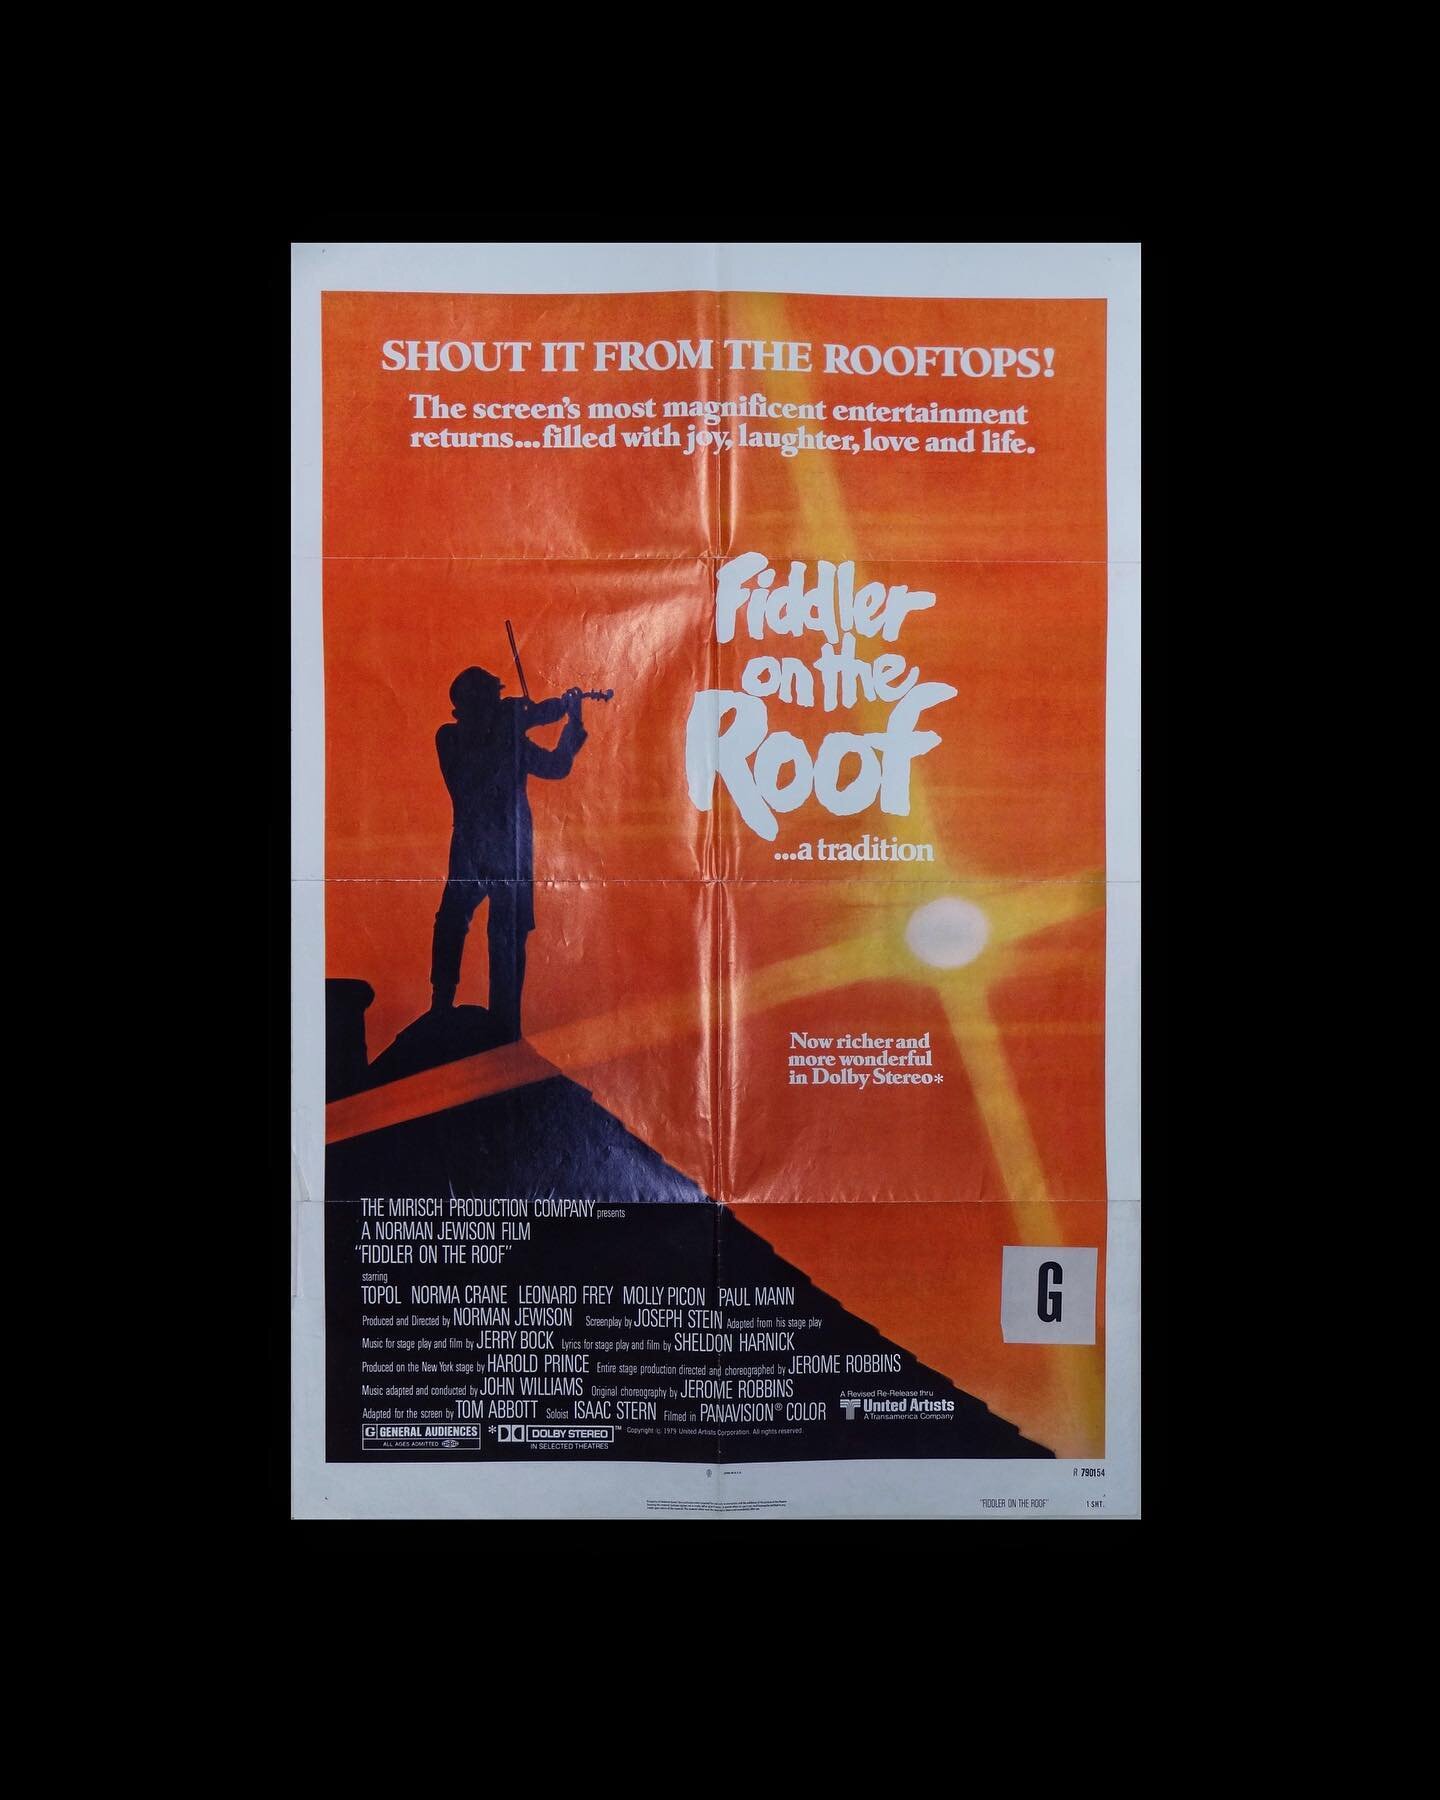 Fiddler on the Roof 1979 Re-release. 1971. US One Sheet #fiddlerontheroof #normanjewison #topol #70smovies #americancinema